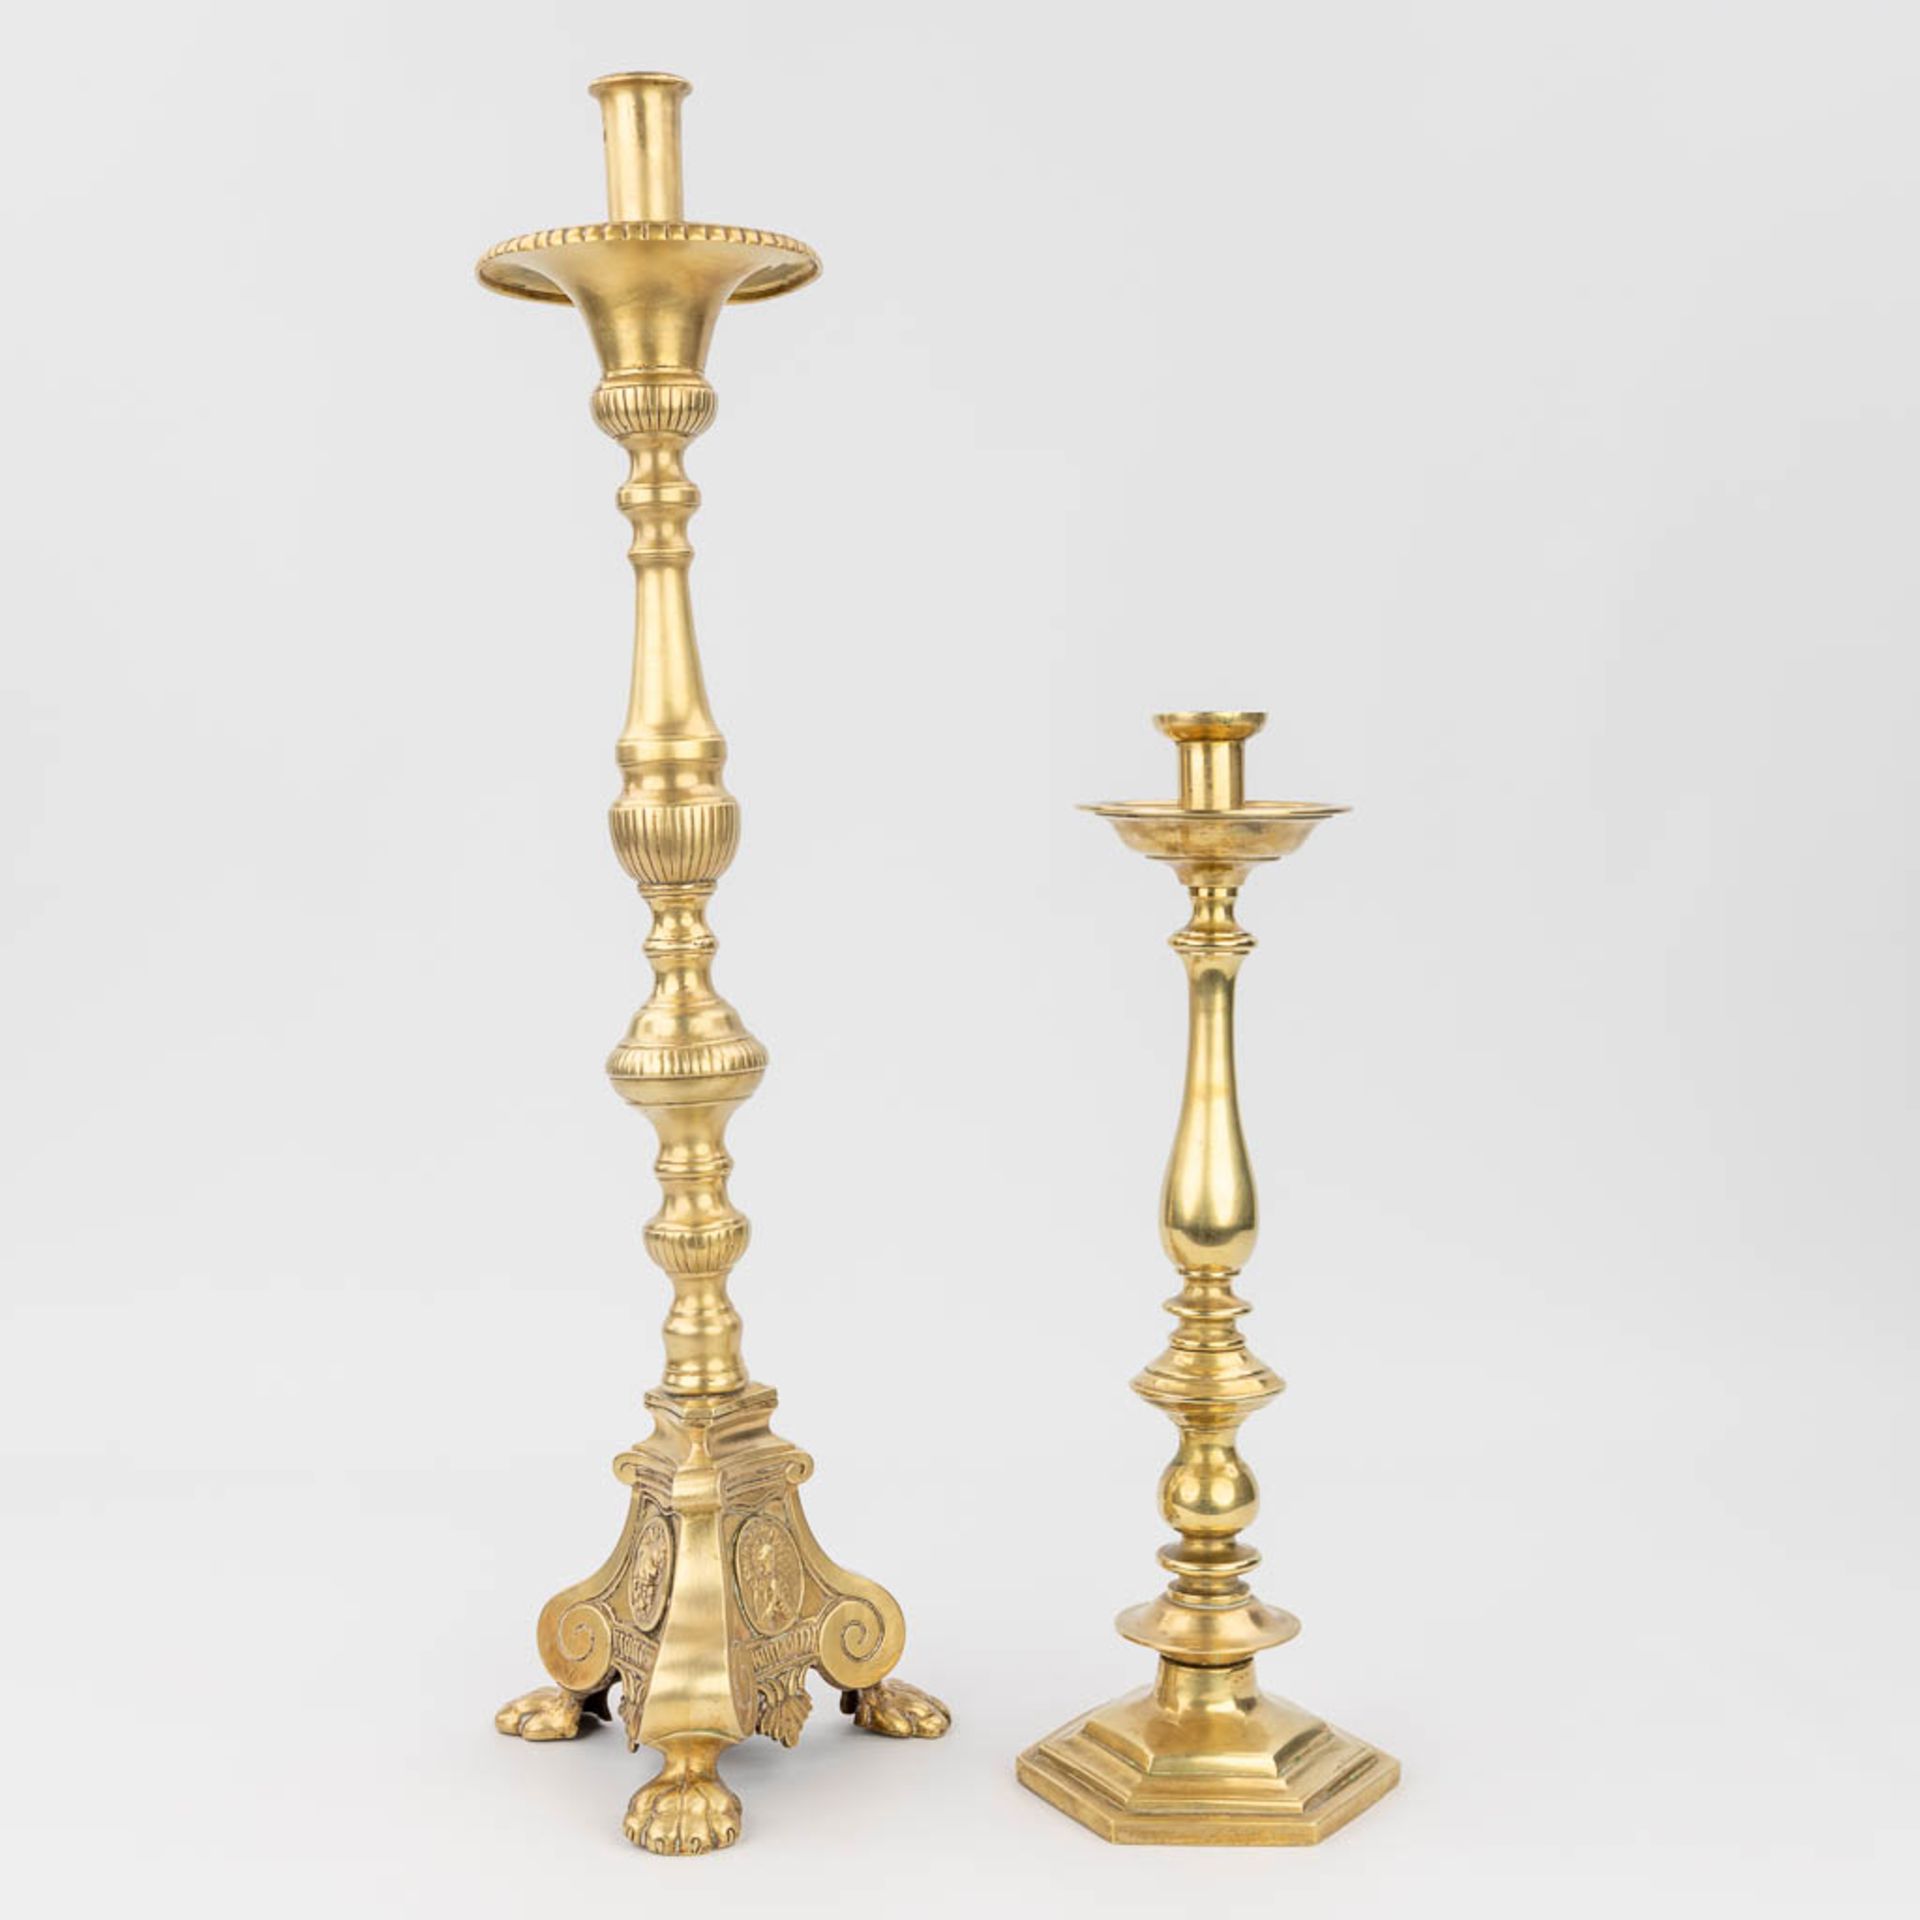 A collection of 2 candelabra made of polished bronze. (H:65 cm) - Image 4 of 14